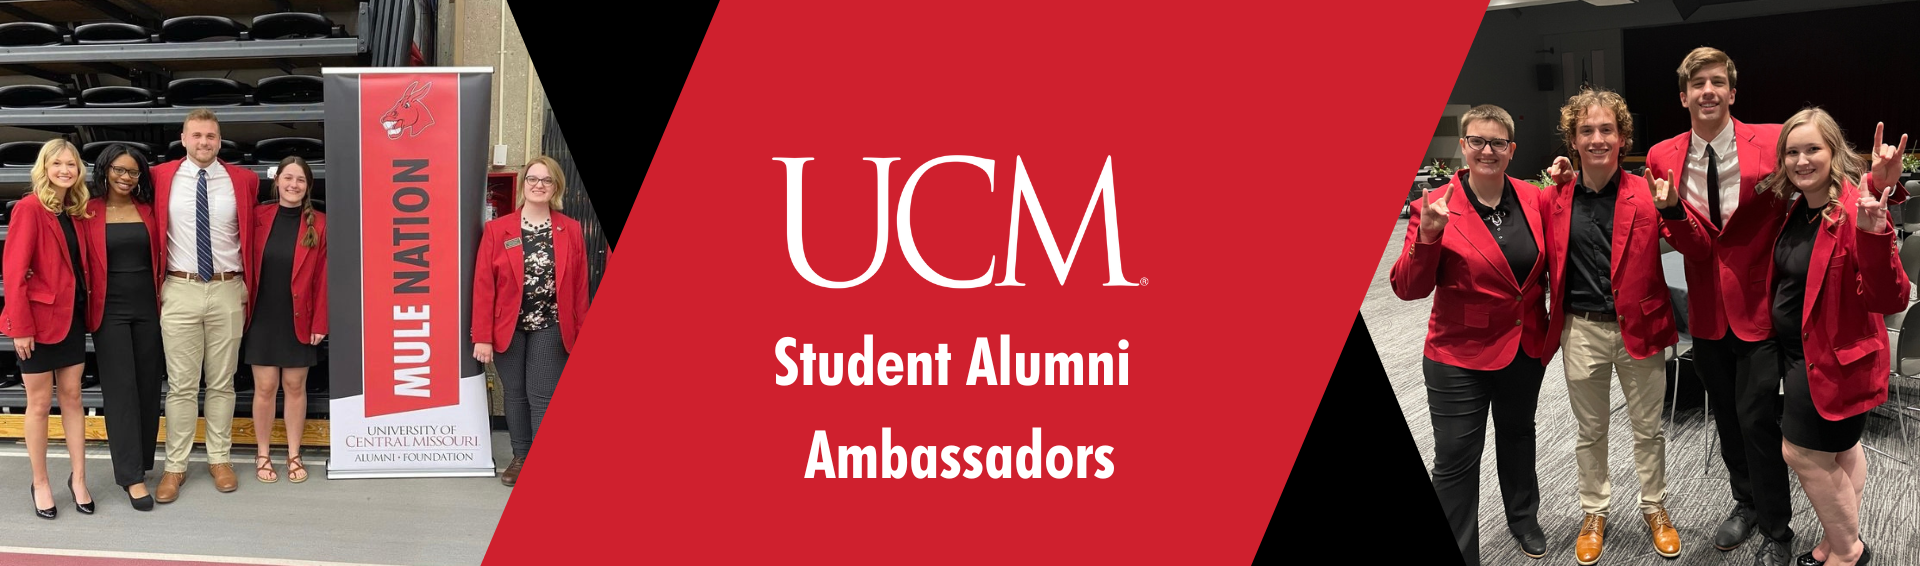 Two photos with groups of UCM Student Alumni Ambassadors